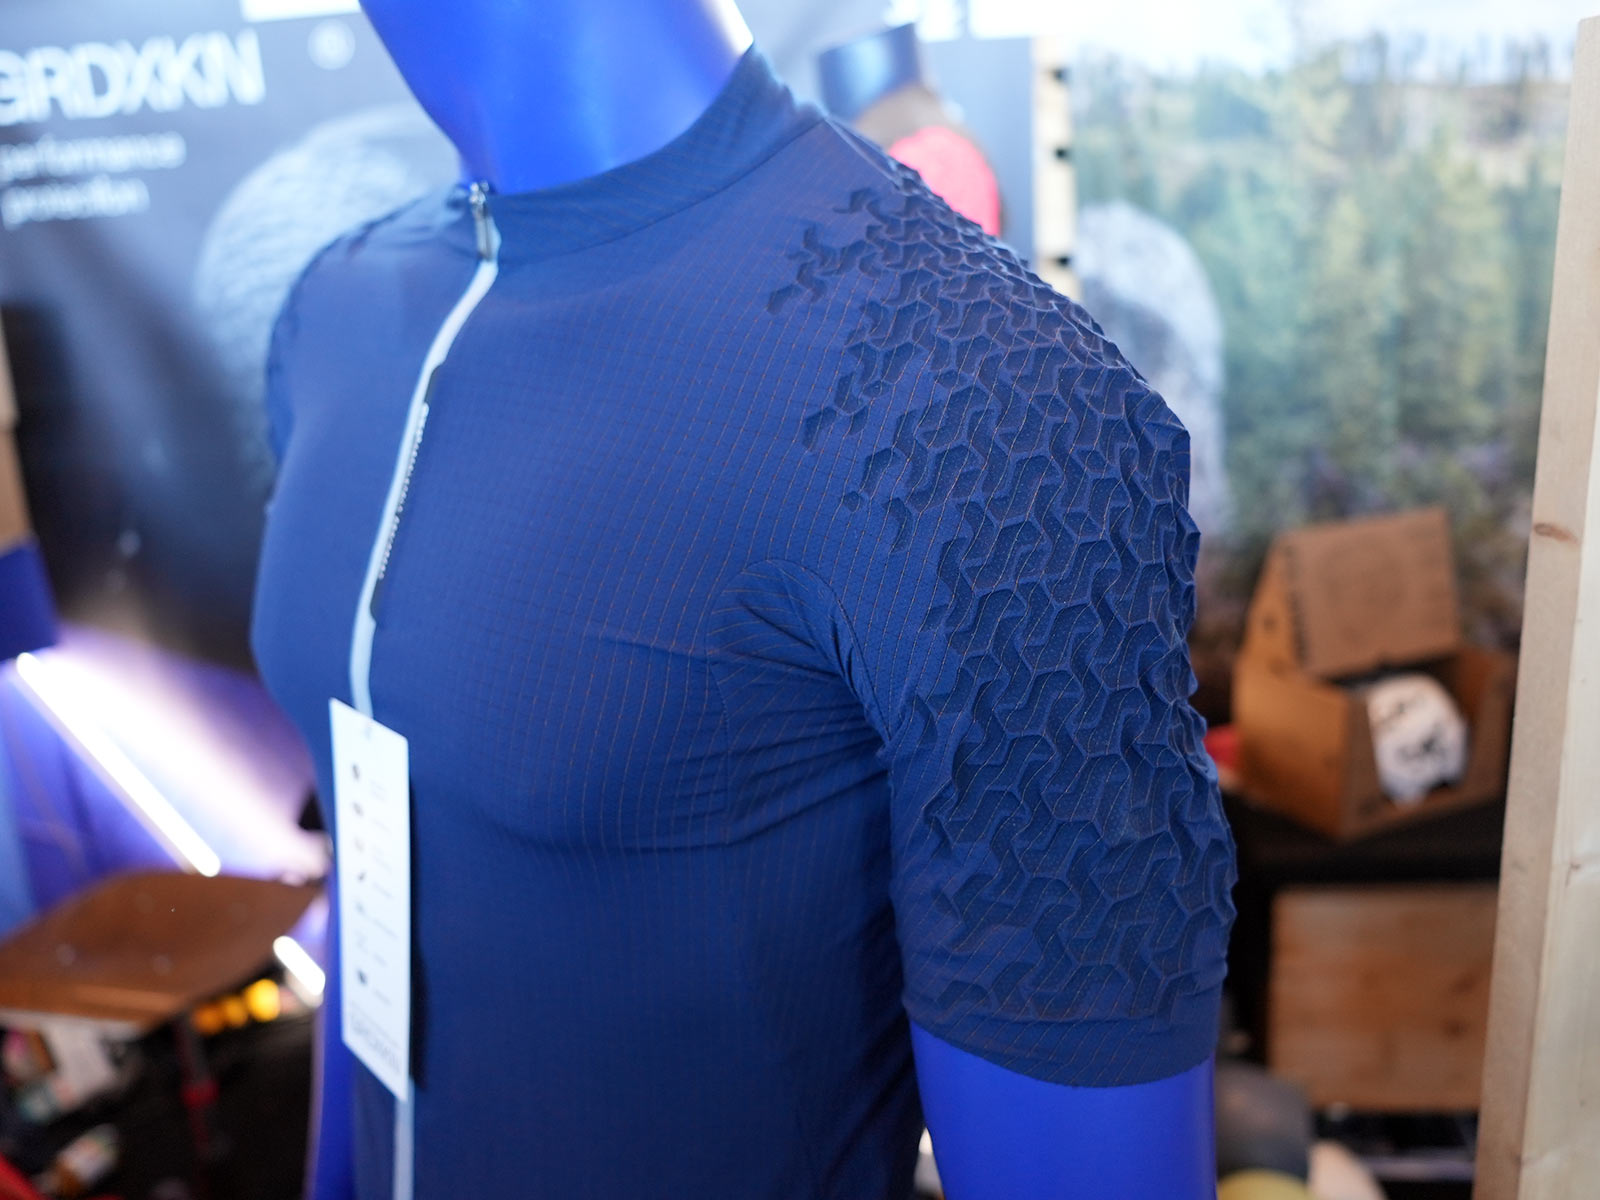 GRDXKN 3D printed protective panels on cycling clothing